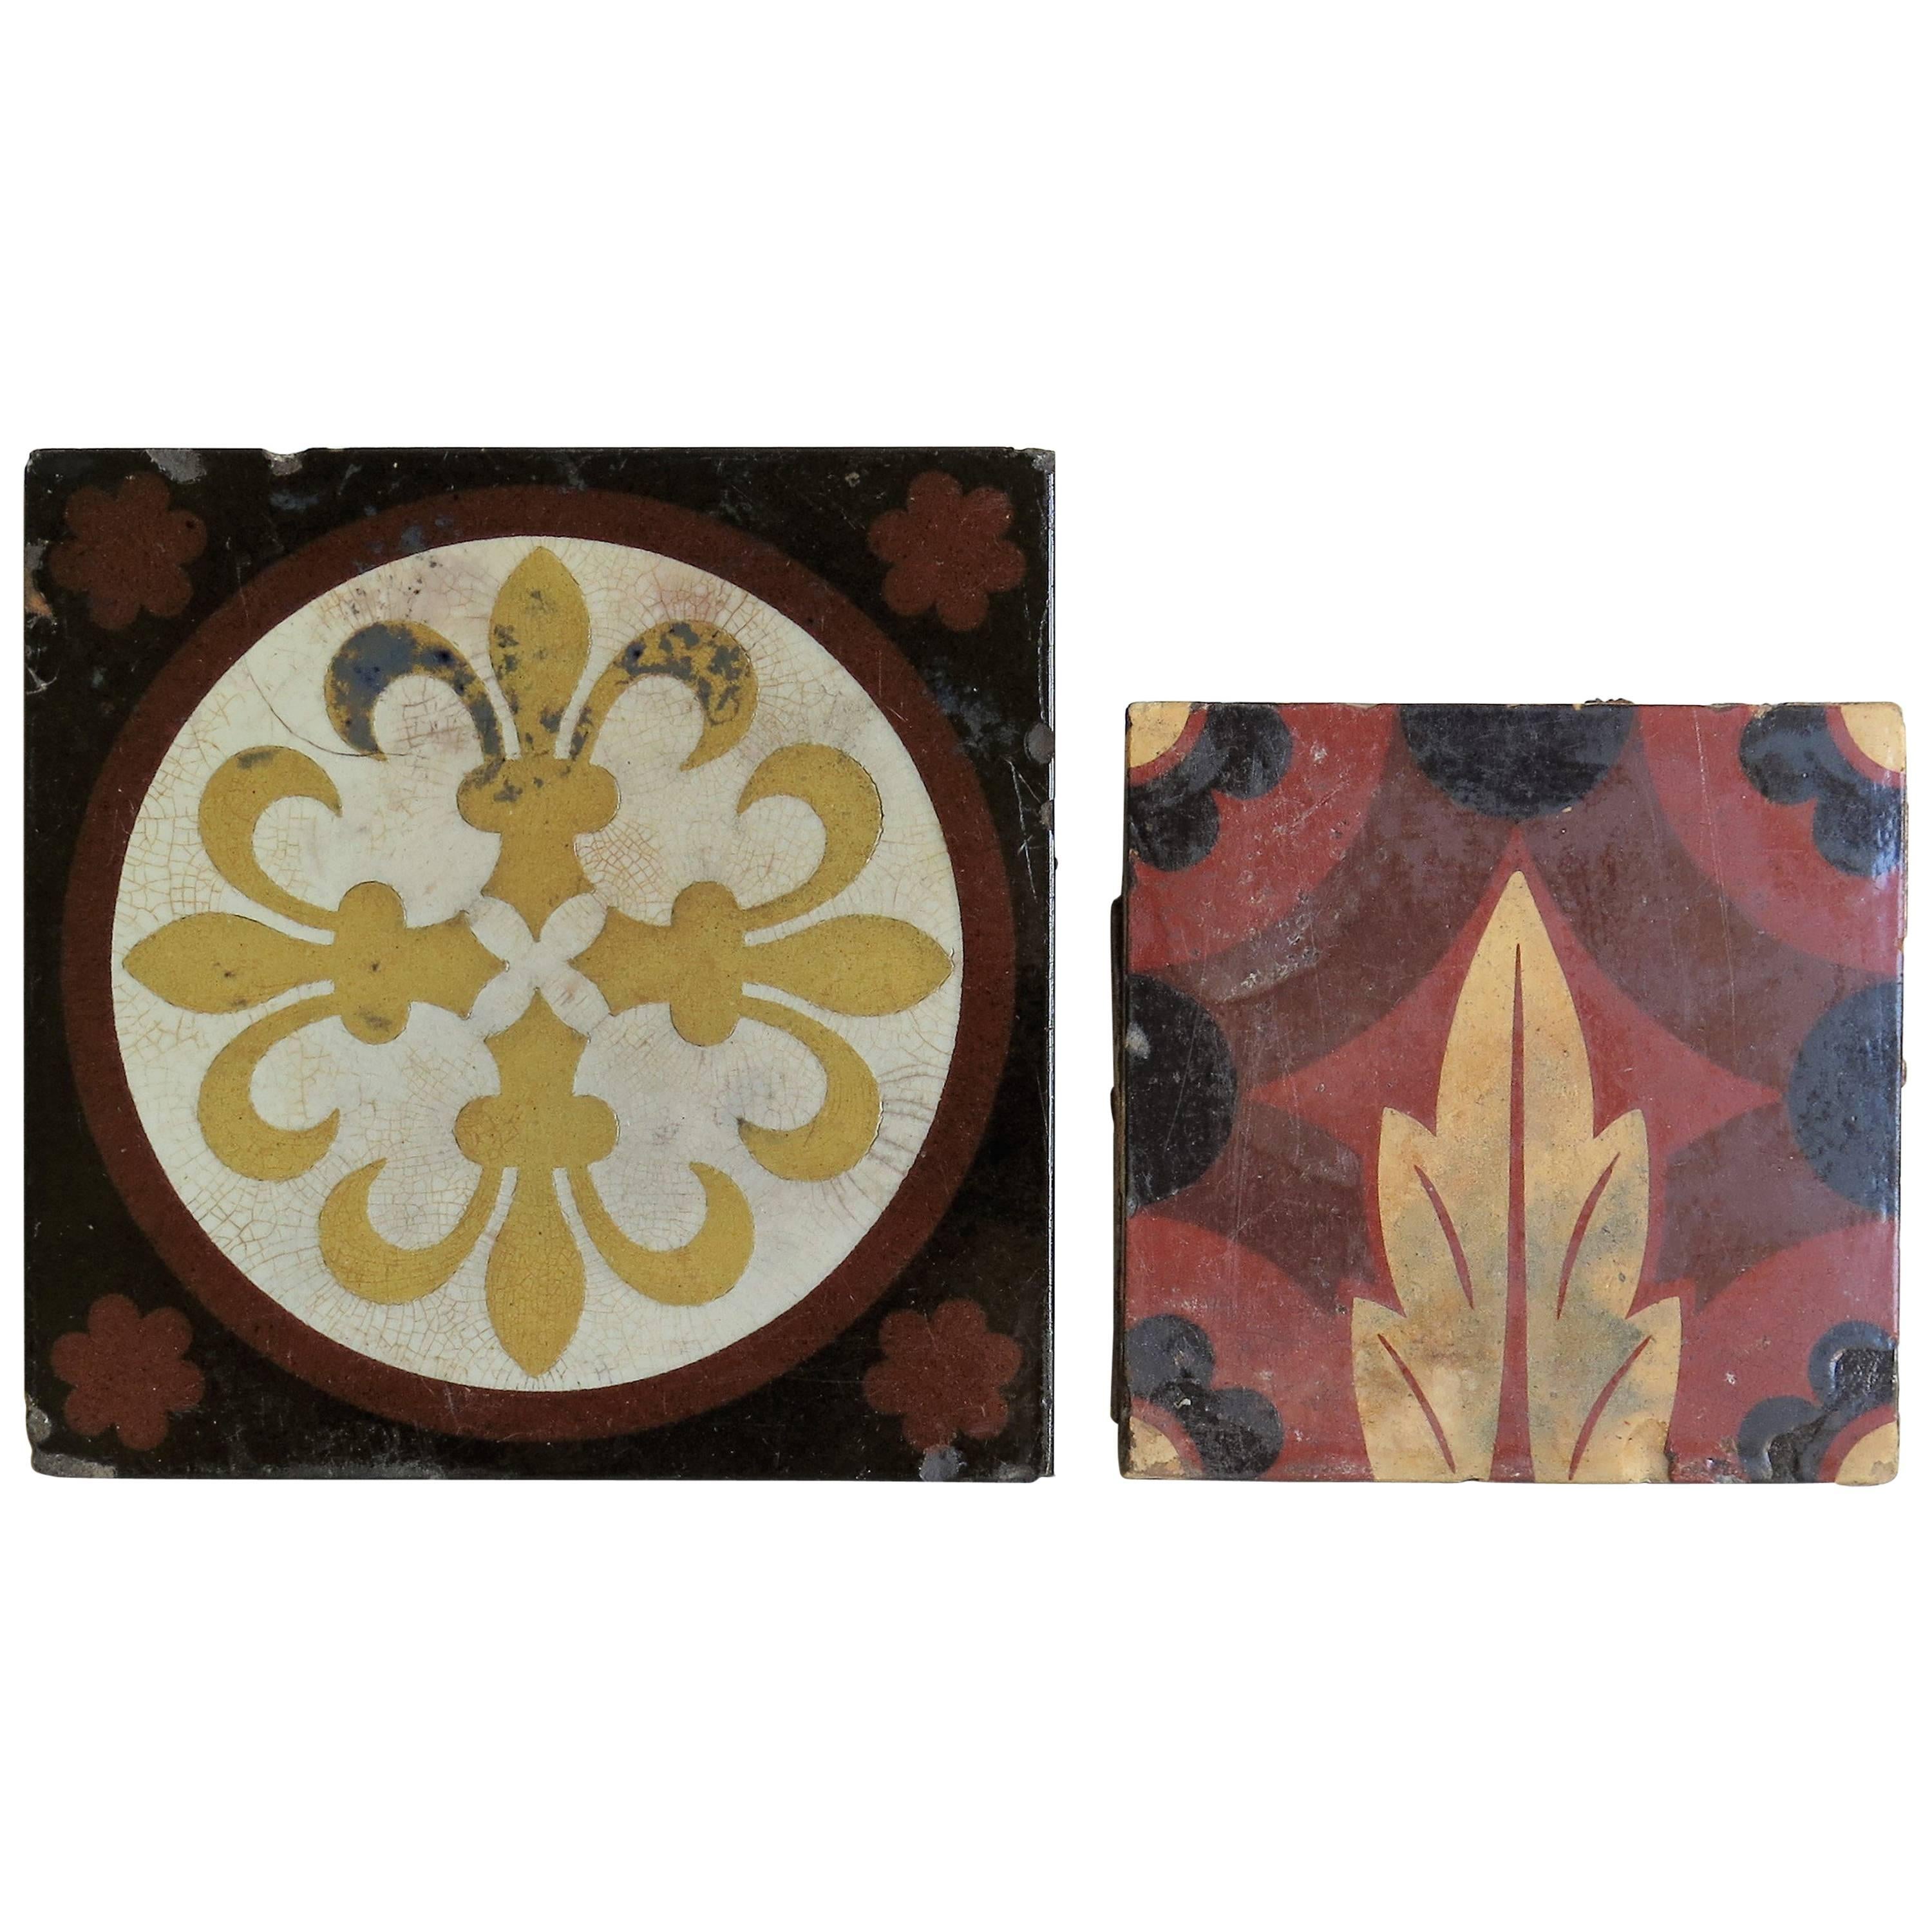 Two 19th Century Ceramic Tiles by William Godwin & Minton Hollins, English